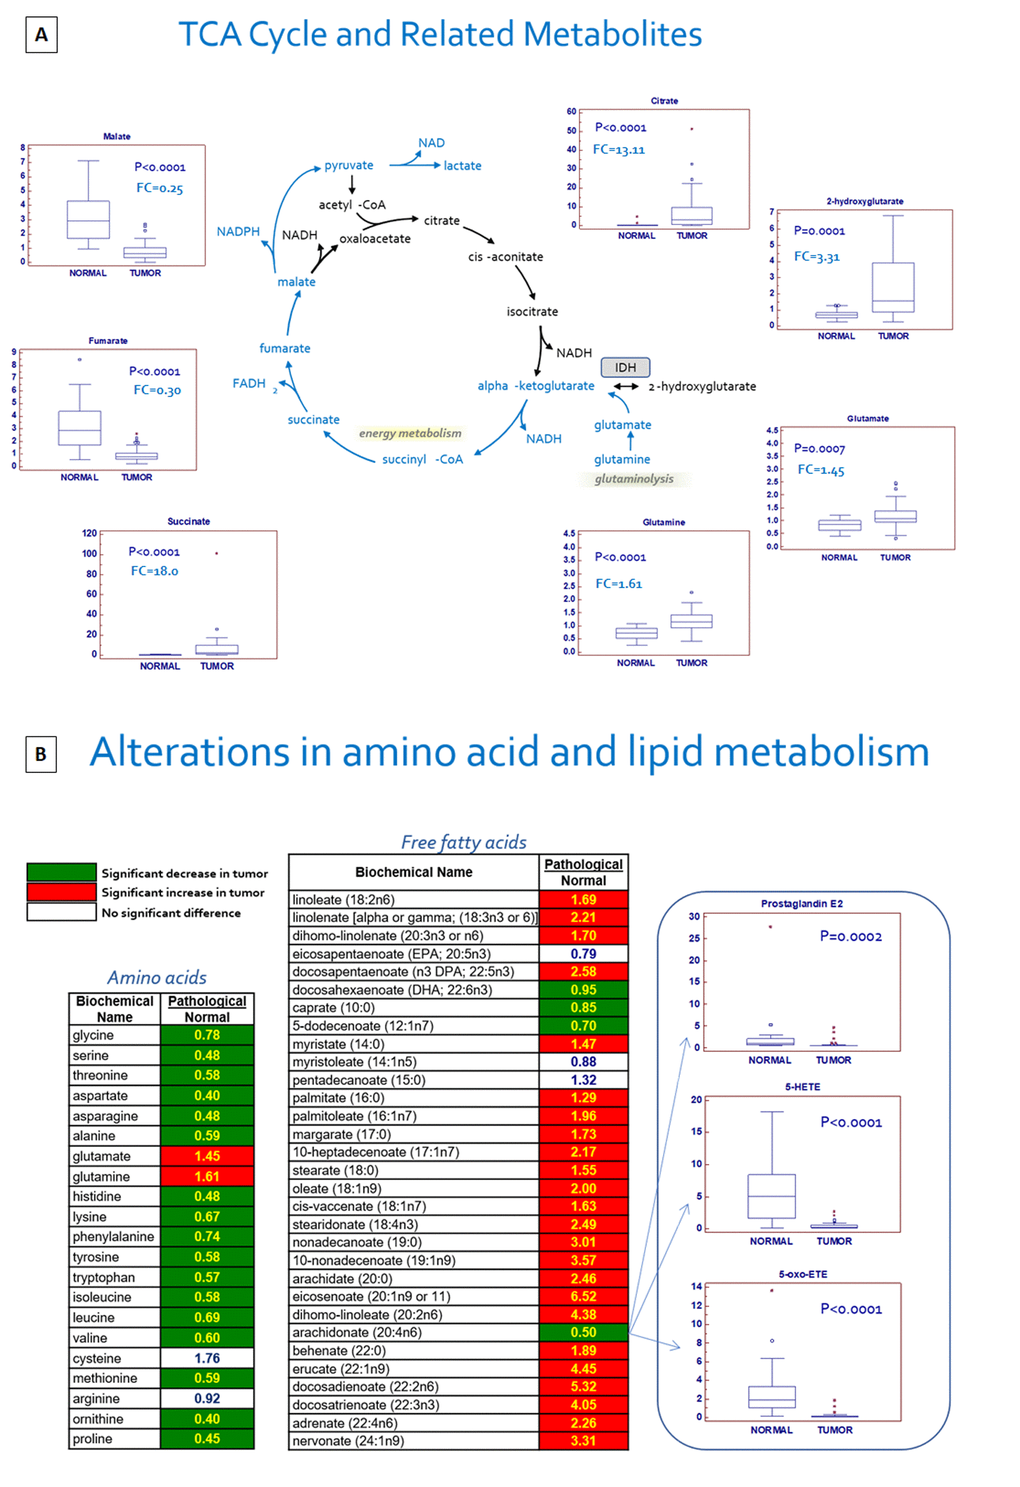 Schematic model summarizing the differences in tricarboxylic acid (TCA) cycle metabolites between normal and tumor tissue (A). Alterations in amino acid and lipid metabolism (B).